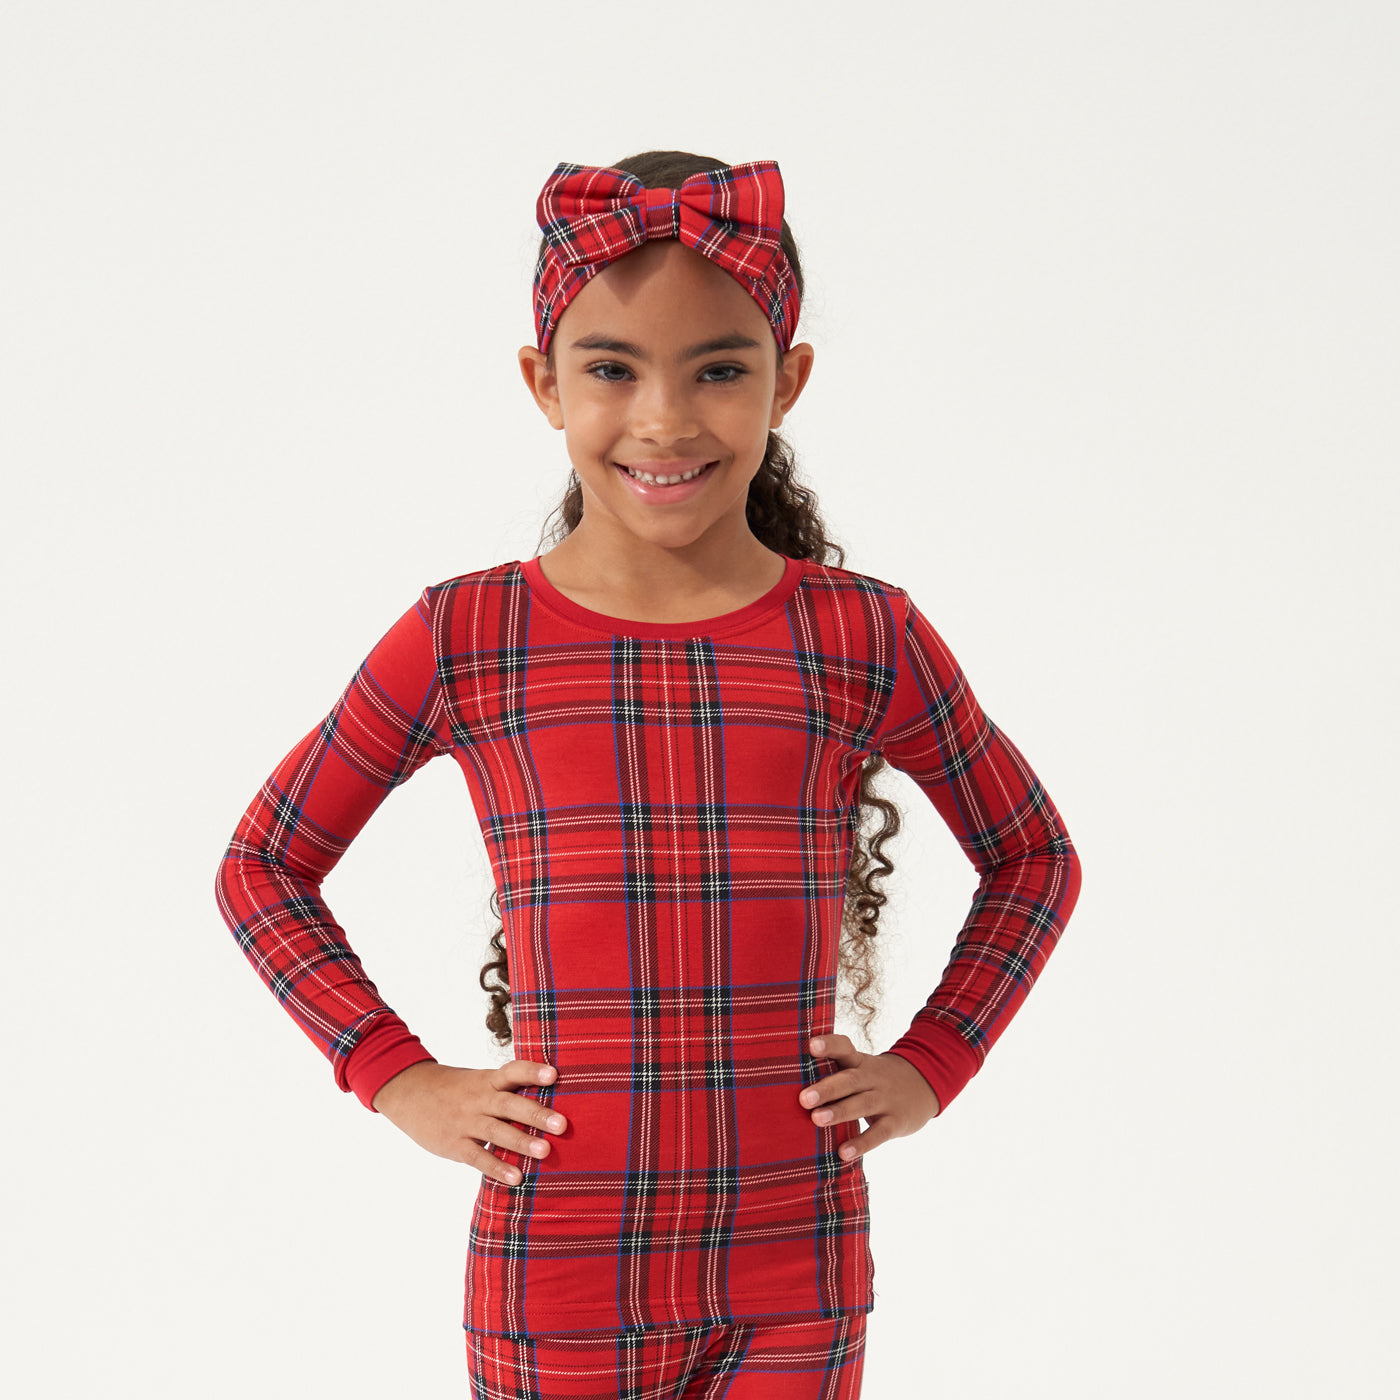 Child wearing a Holiday Plaid luxe bow headband and matching pajamas